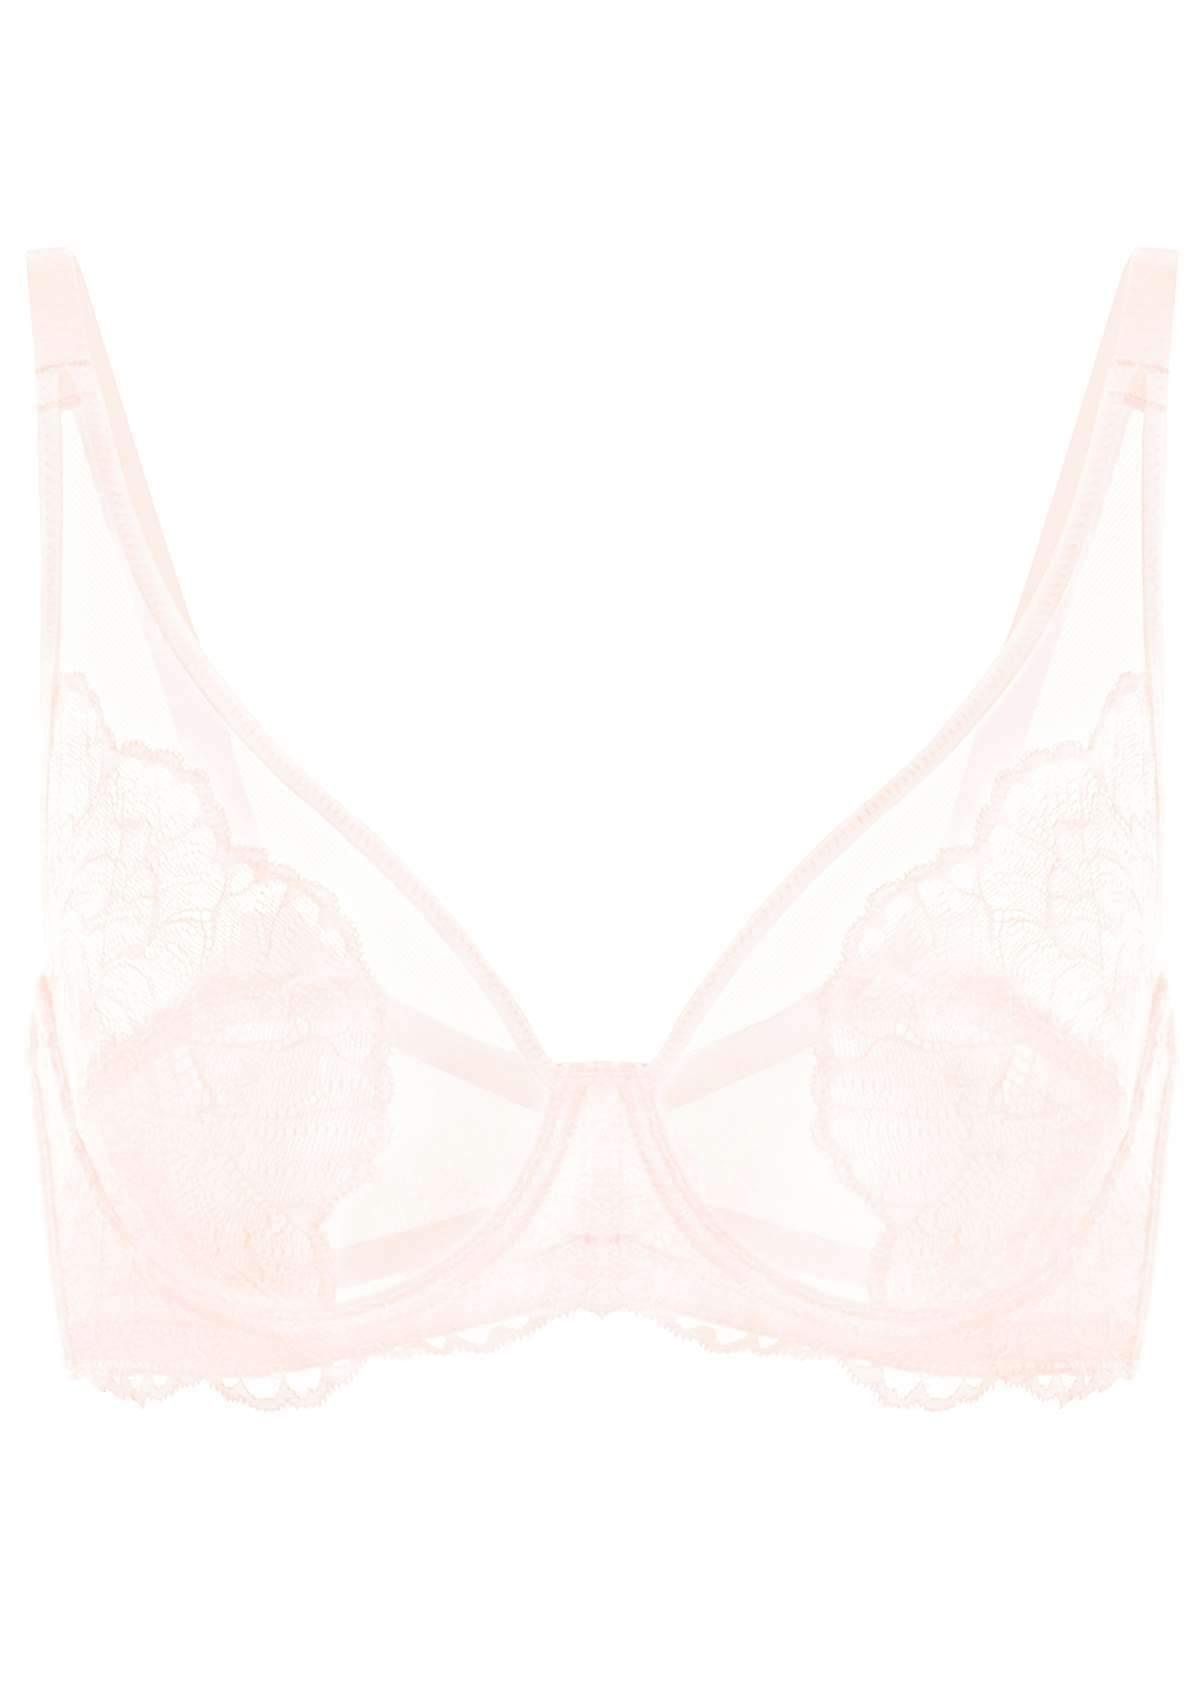 HSIA Blossom Sheer Lace Bra: Comfortable Underwire Bra For Big Busts - White / 38 / DDD/F